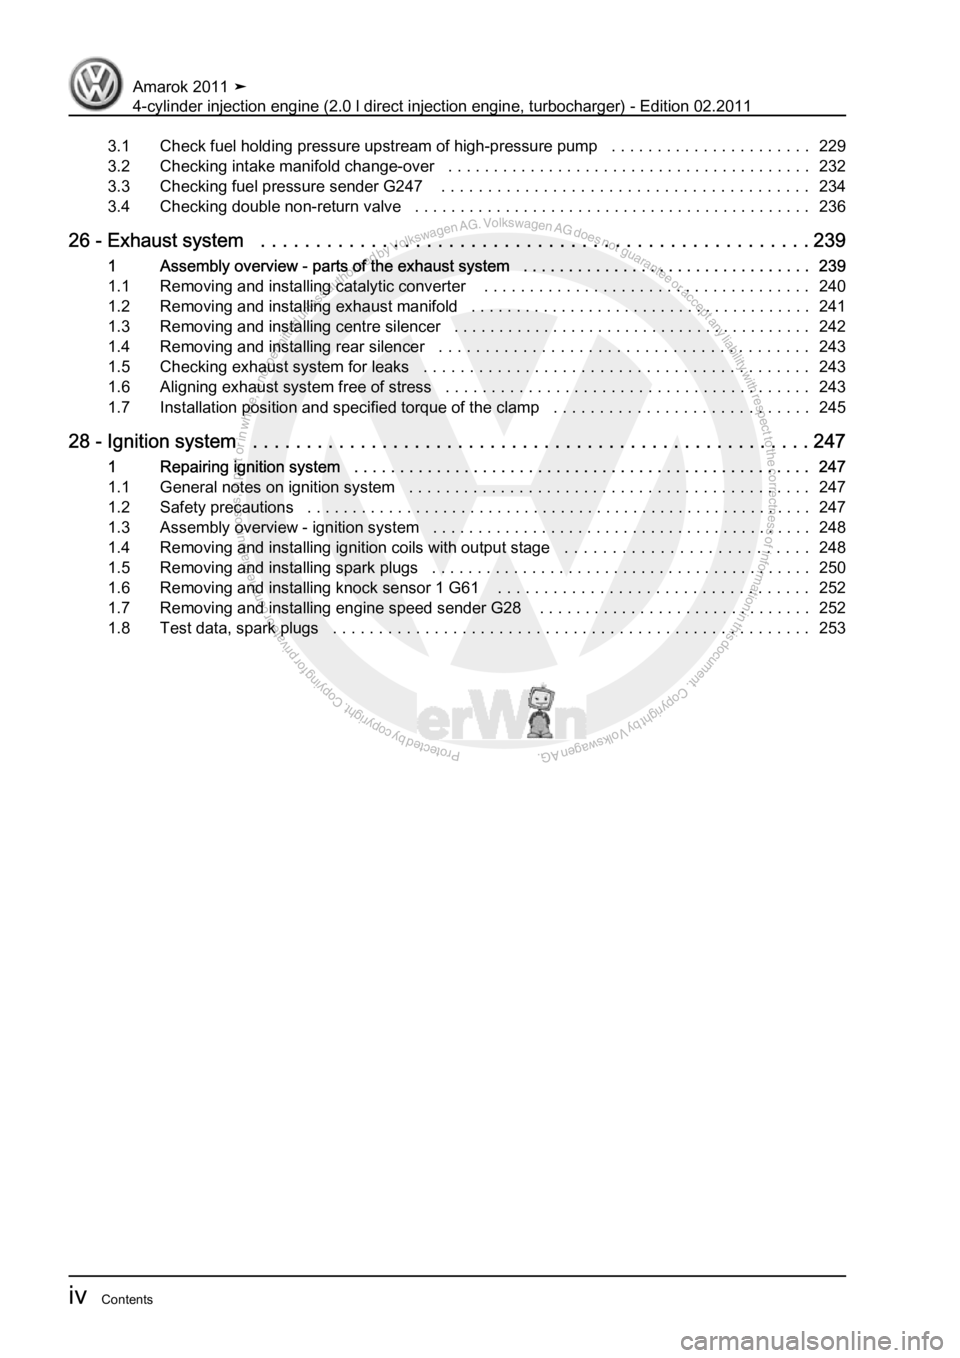 VOLKSWAGEN AMAROK 2011  Workshop Manual Protected by copyright. Copying for private or commercial purposes, in partor in whole, is not permitted unless authorised by Volkswagen AG. Volkswagen AG does notguarantee or accept any liability wit